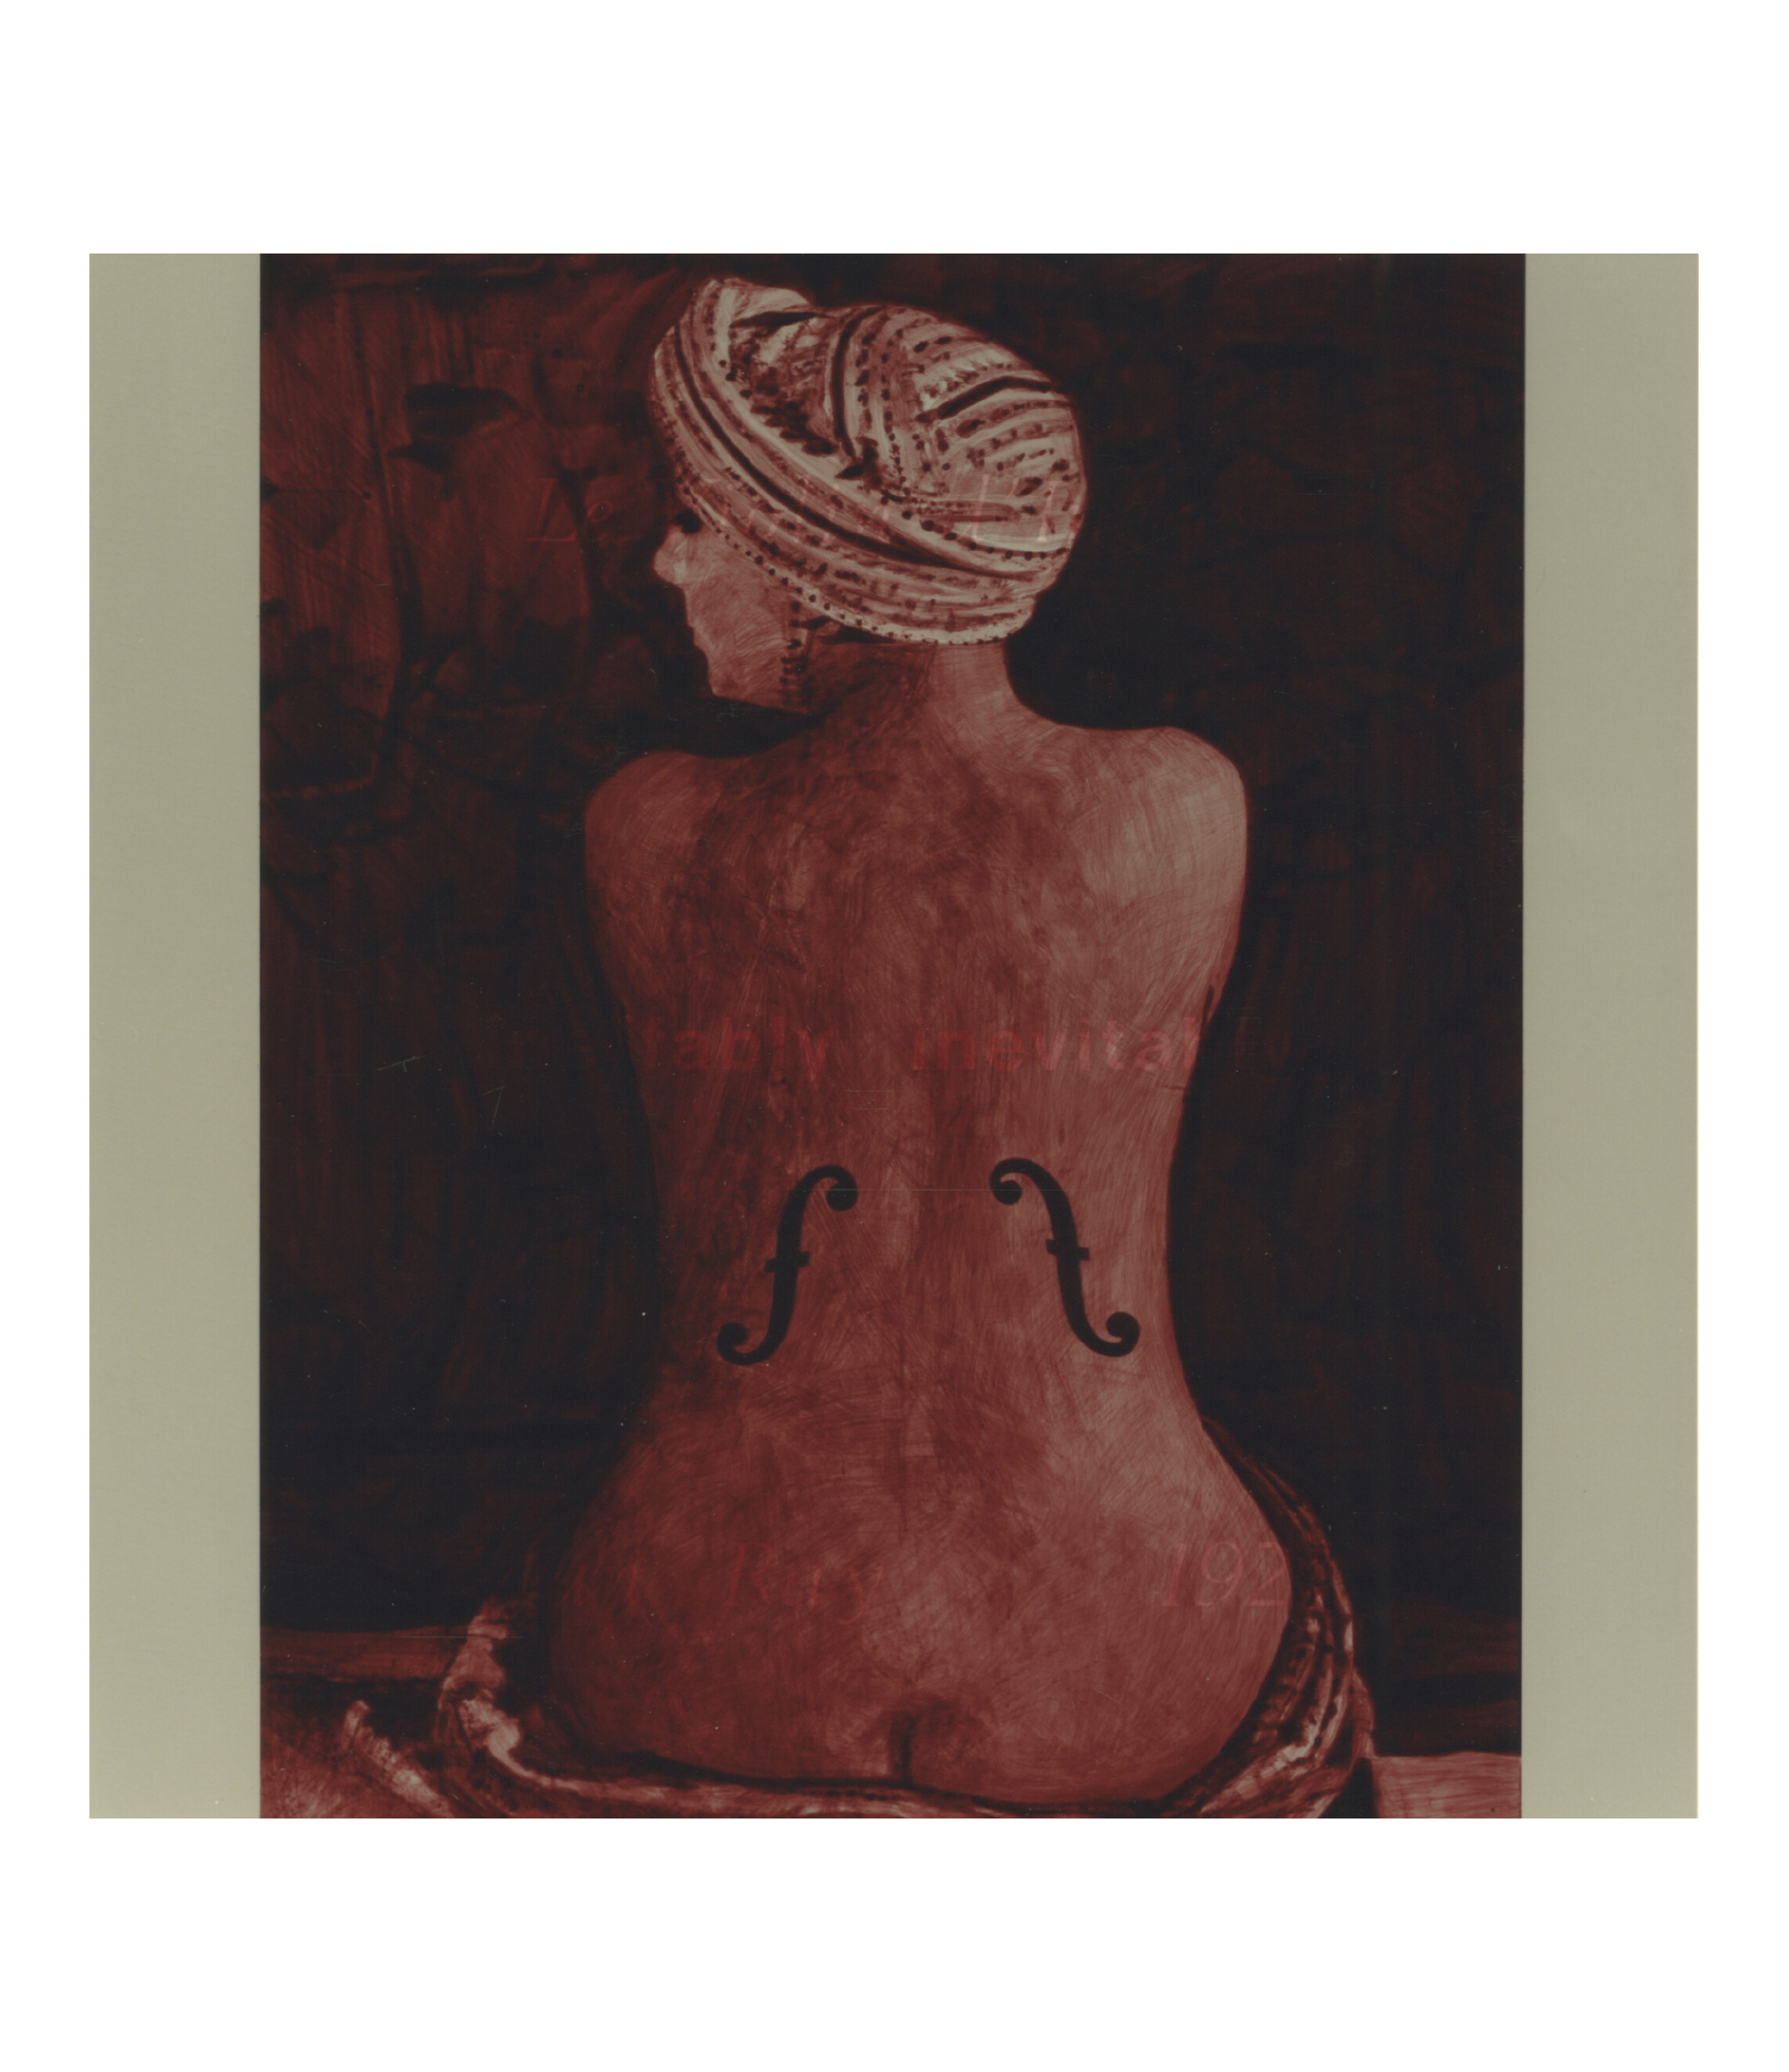   ineffably, inevitably (after Man Ray, 1928 / Le Violon d’Ingres)   18 x 18, acrylic on MDF, 1994 